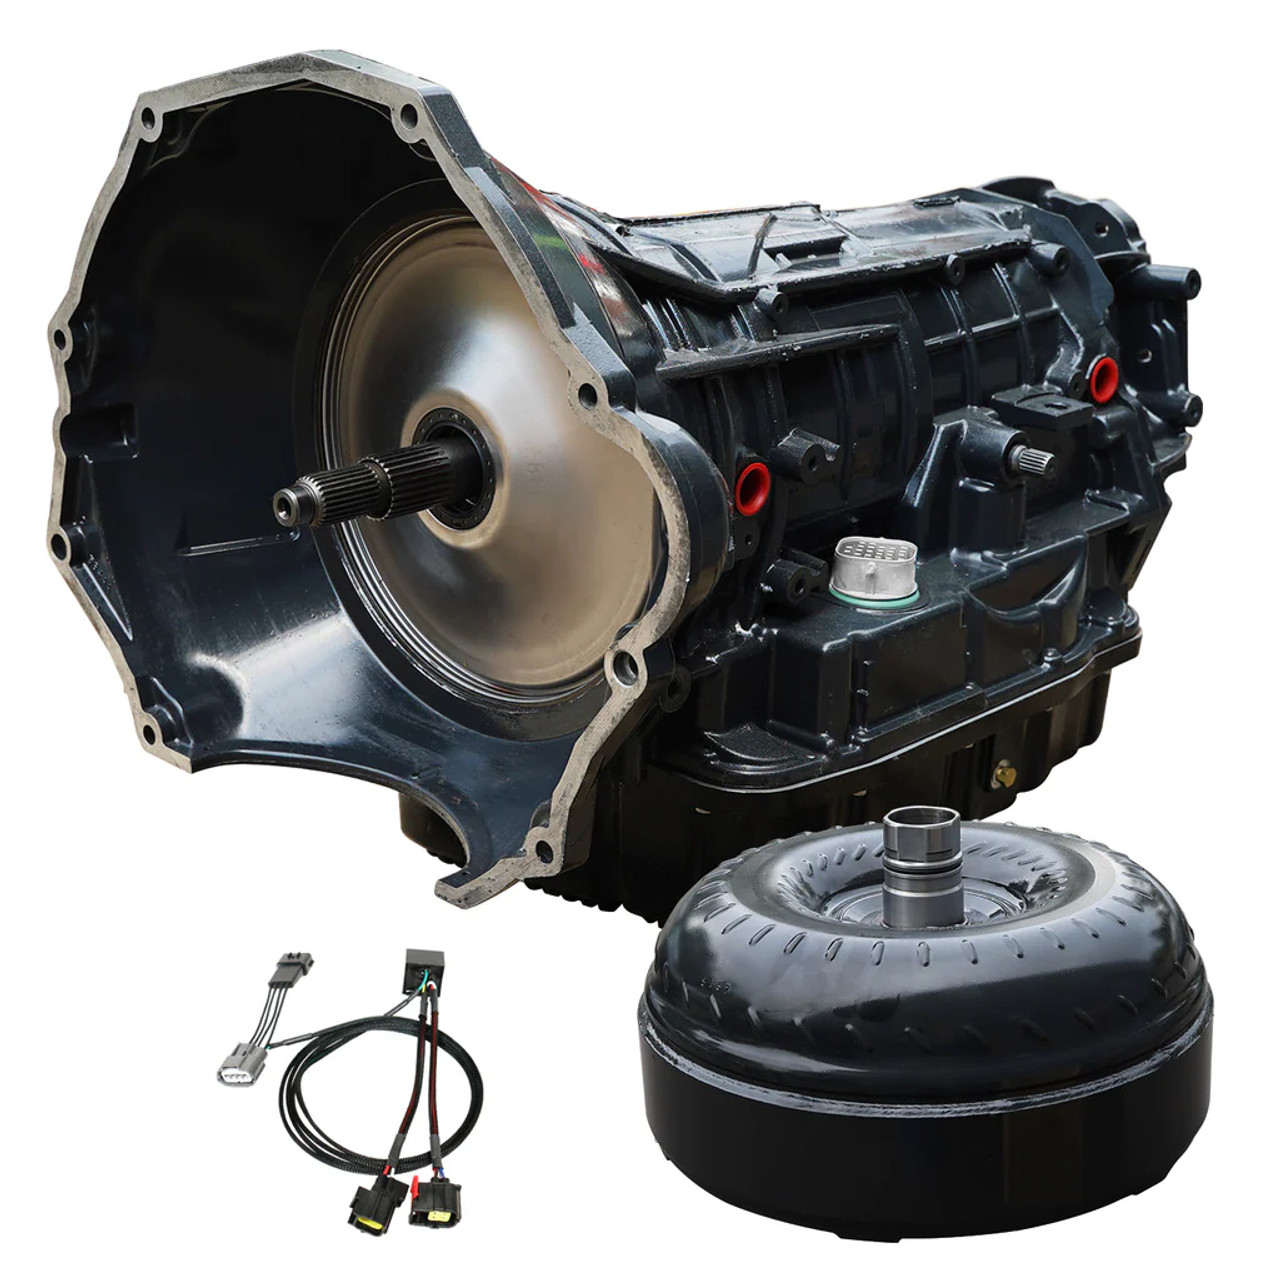 BD TOWMASTER DODGE 68RFE TRANSMISSION & CONVERTER PACKAGE for 2007.5 to 2018 Dodge 5.9L Cummins (1064262SS) Main View